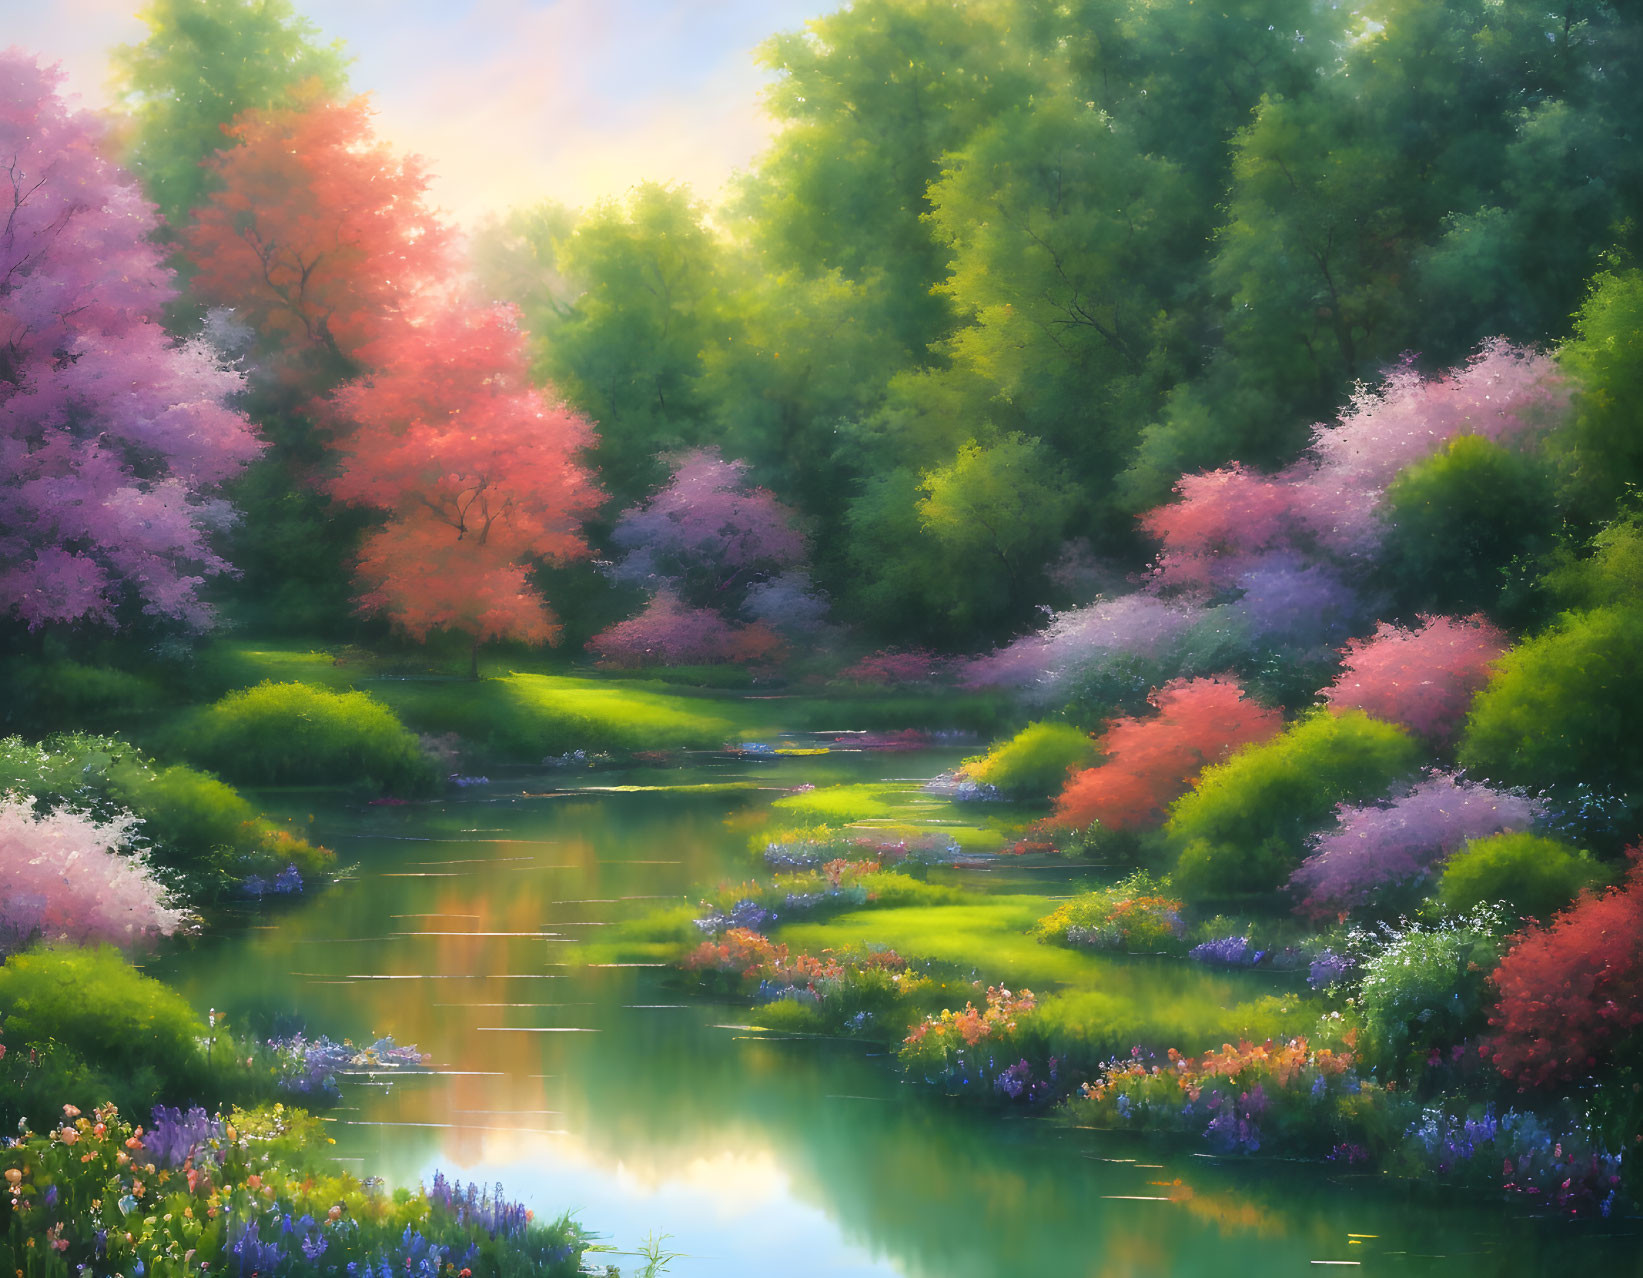 Tranquil river landscape with colorful blossoms at sunrise